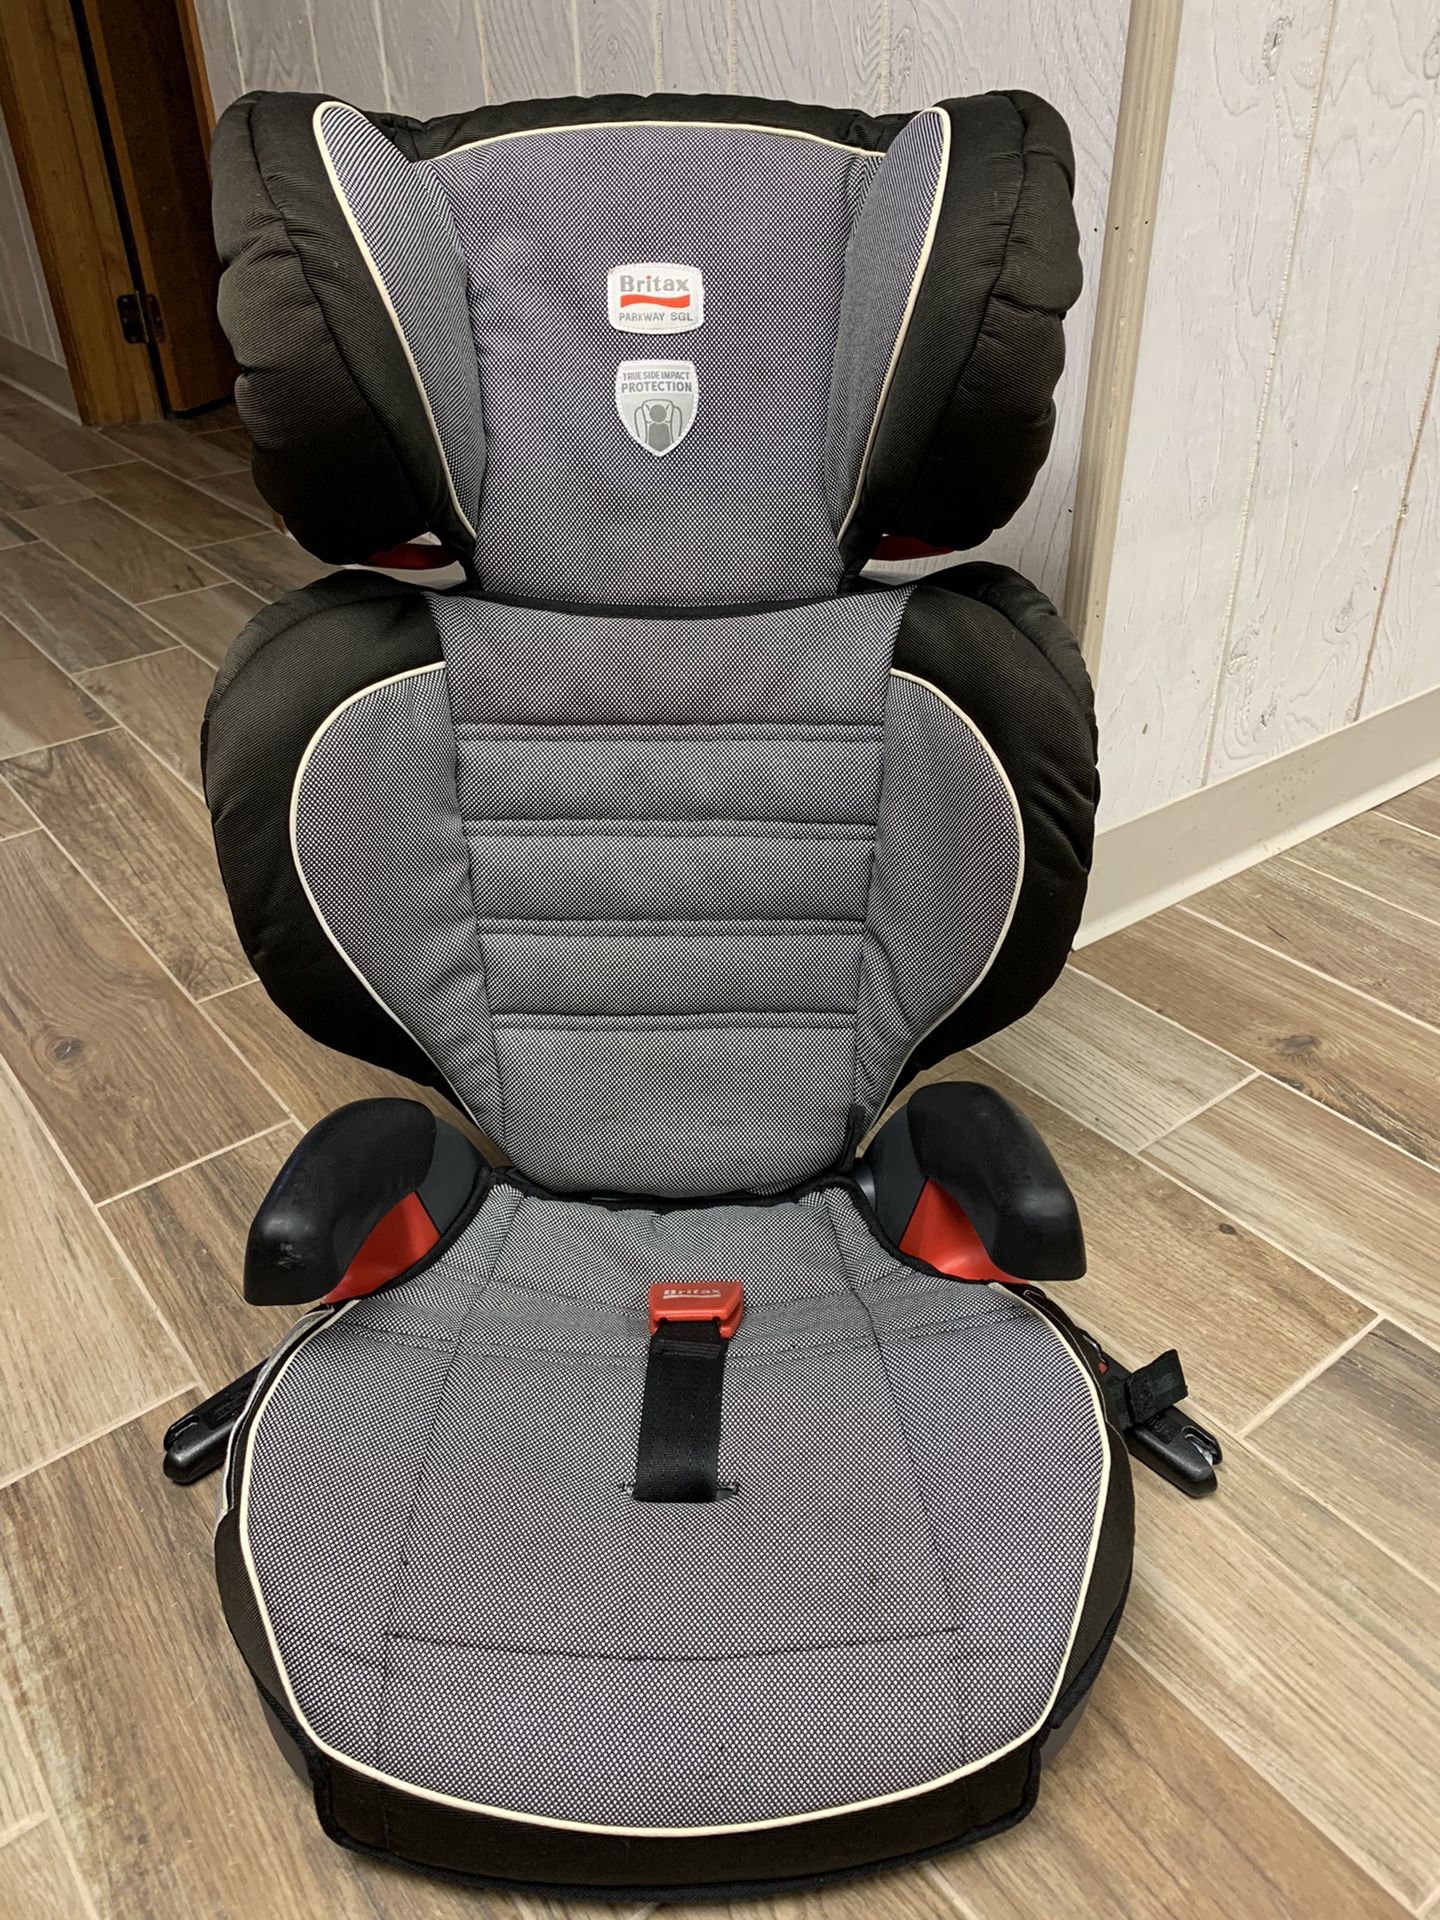 Britax Parkway SGL Booster Seat